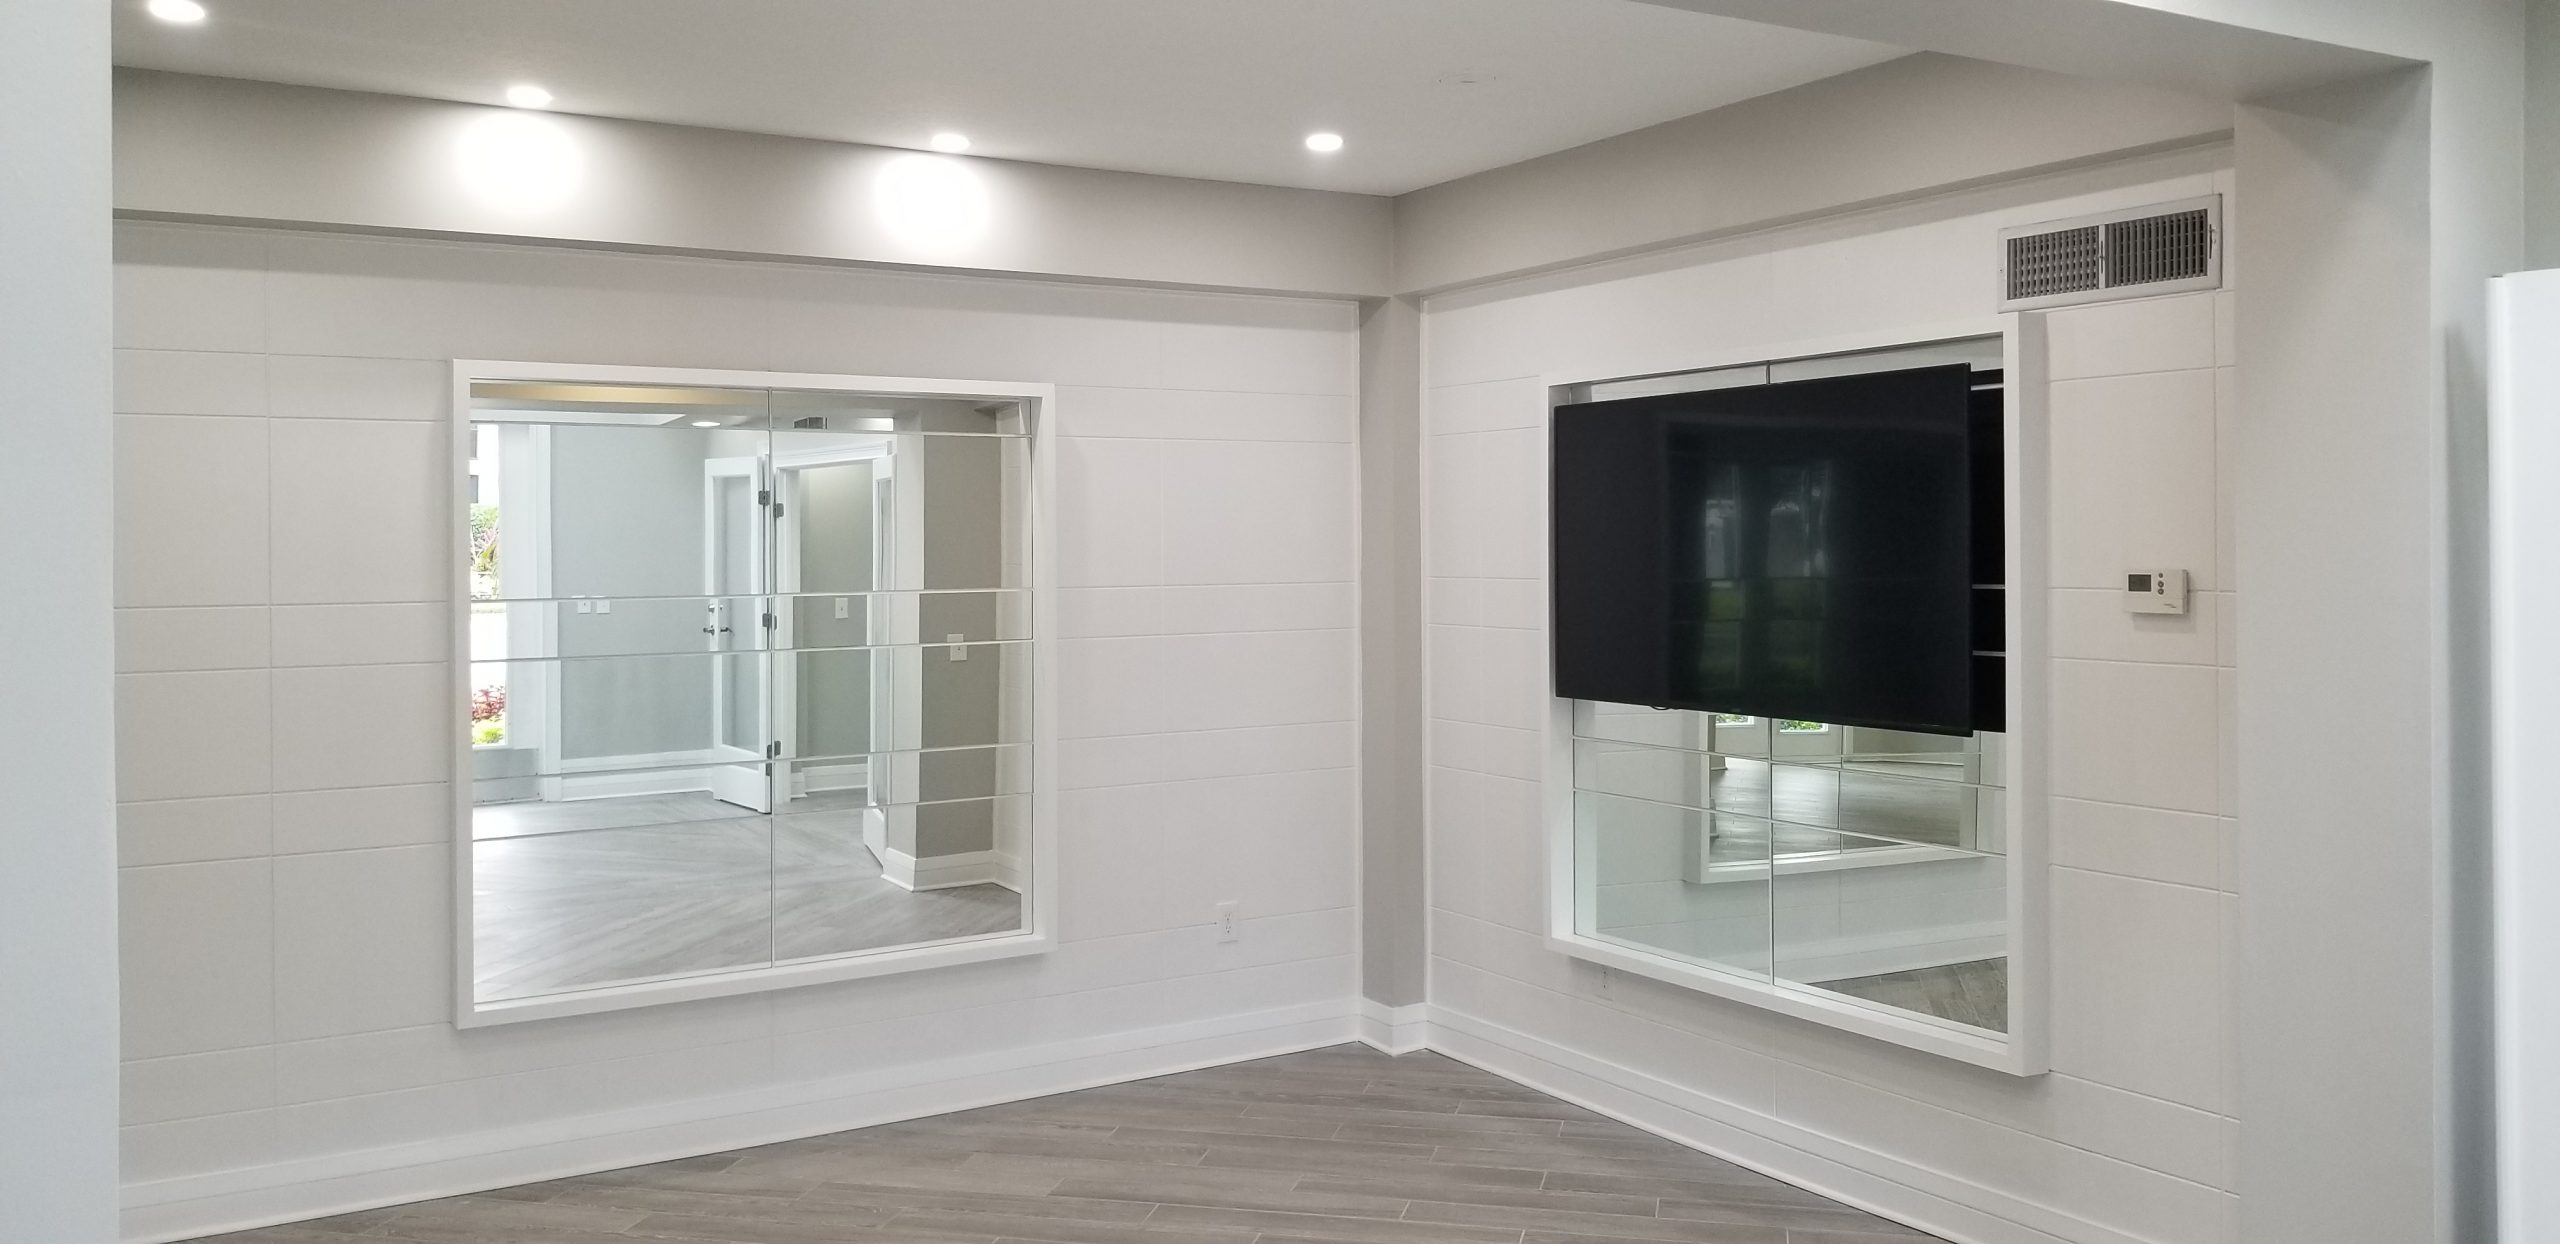 Arbors at Carrollwood Apartments - Wall Design, Mirrors and TV Installation